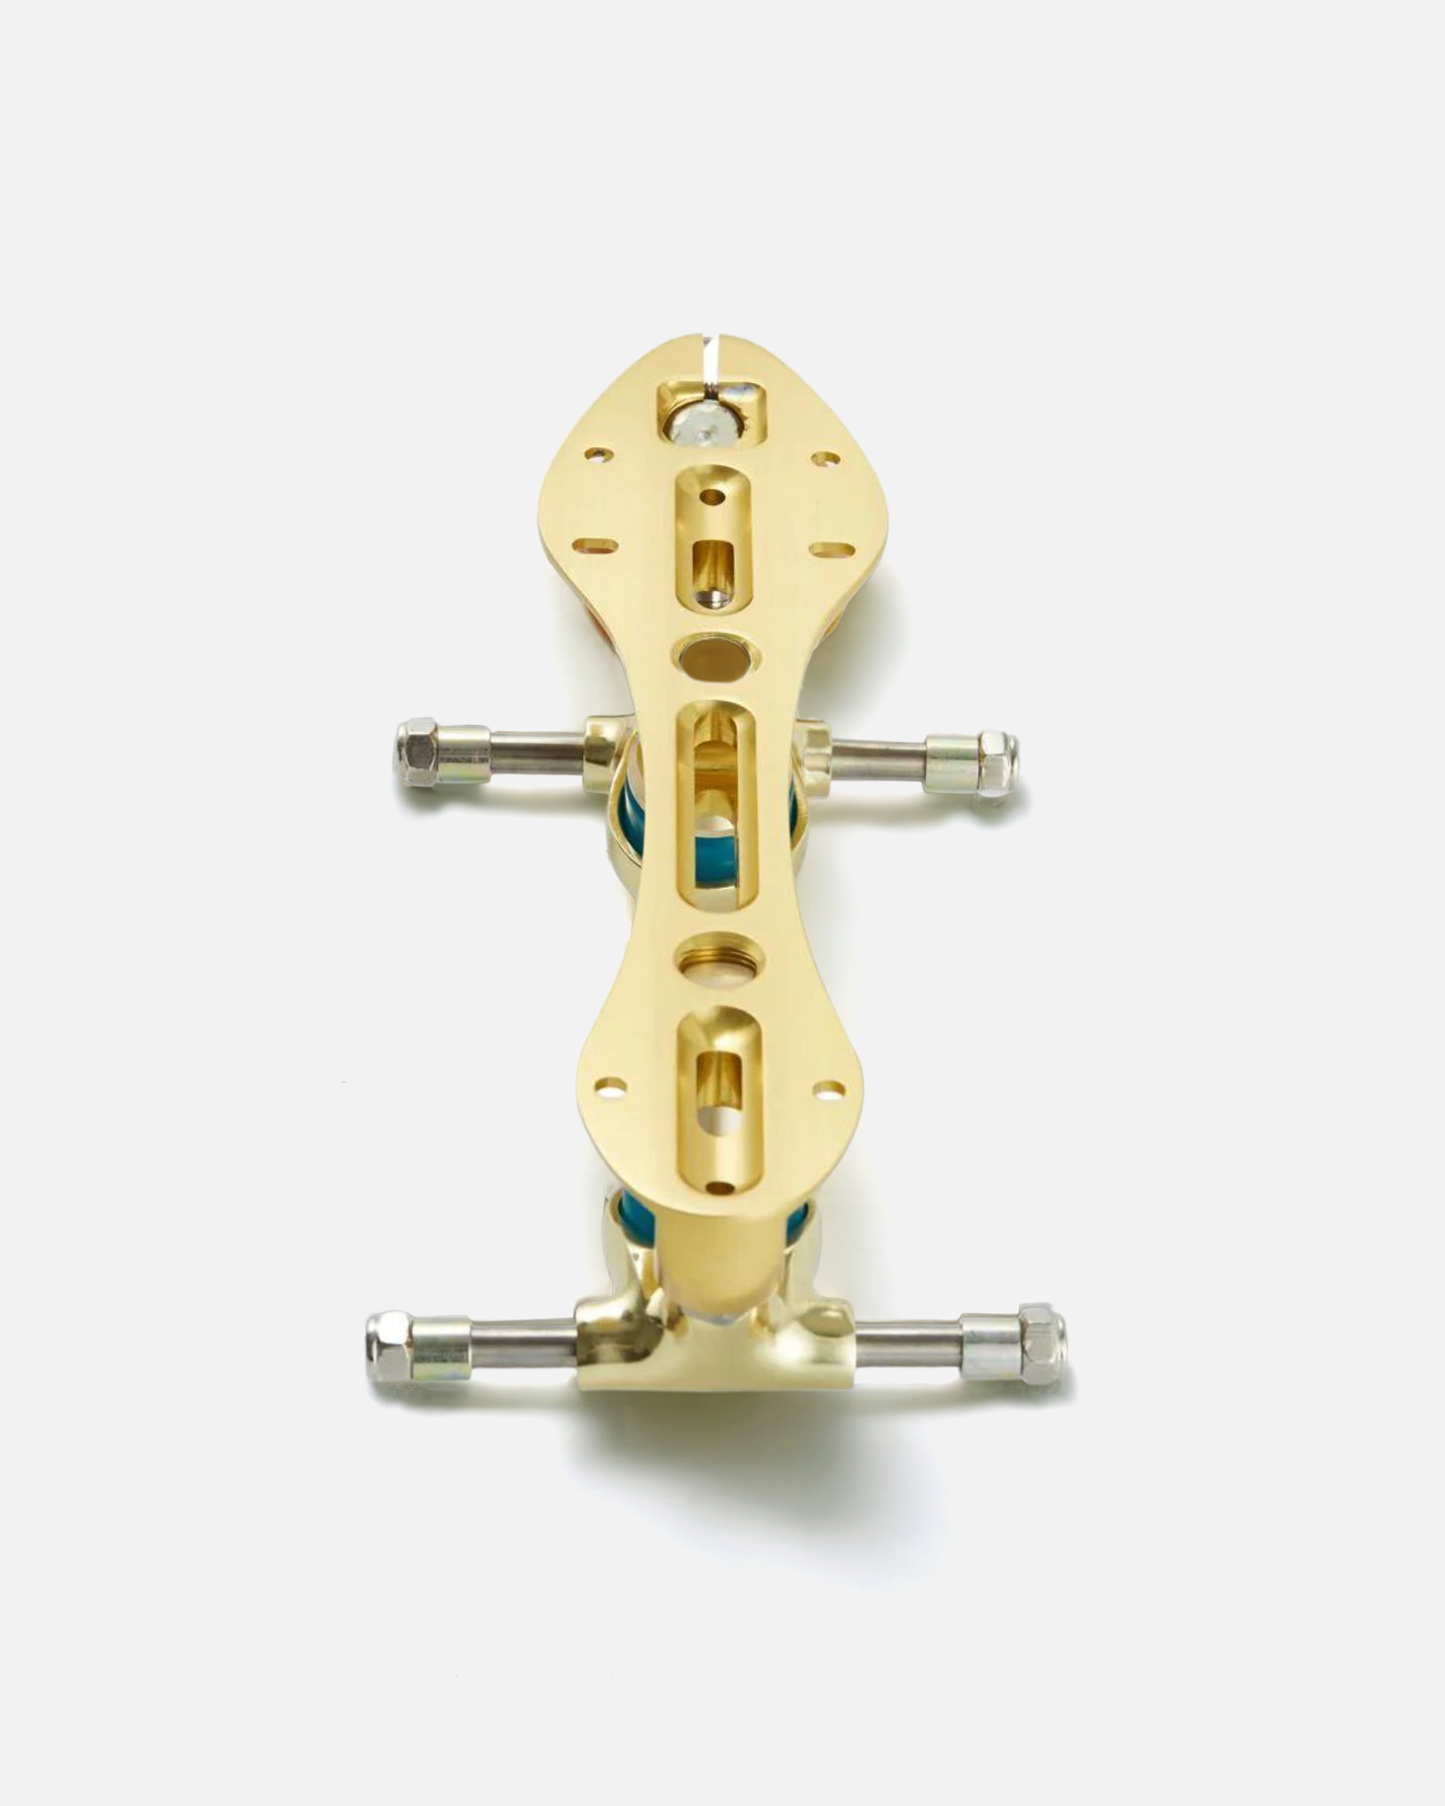 Vanguard or Jaboco super light gold quad frames — without bearings and wheels